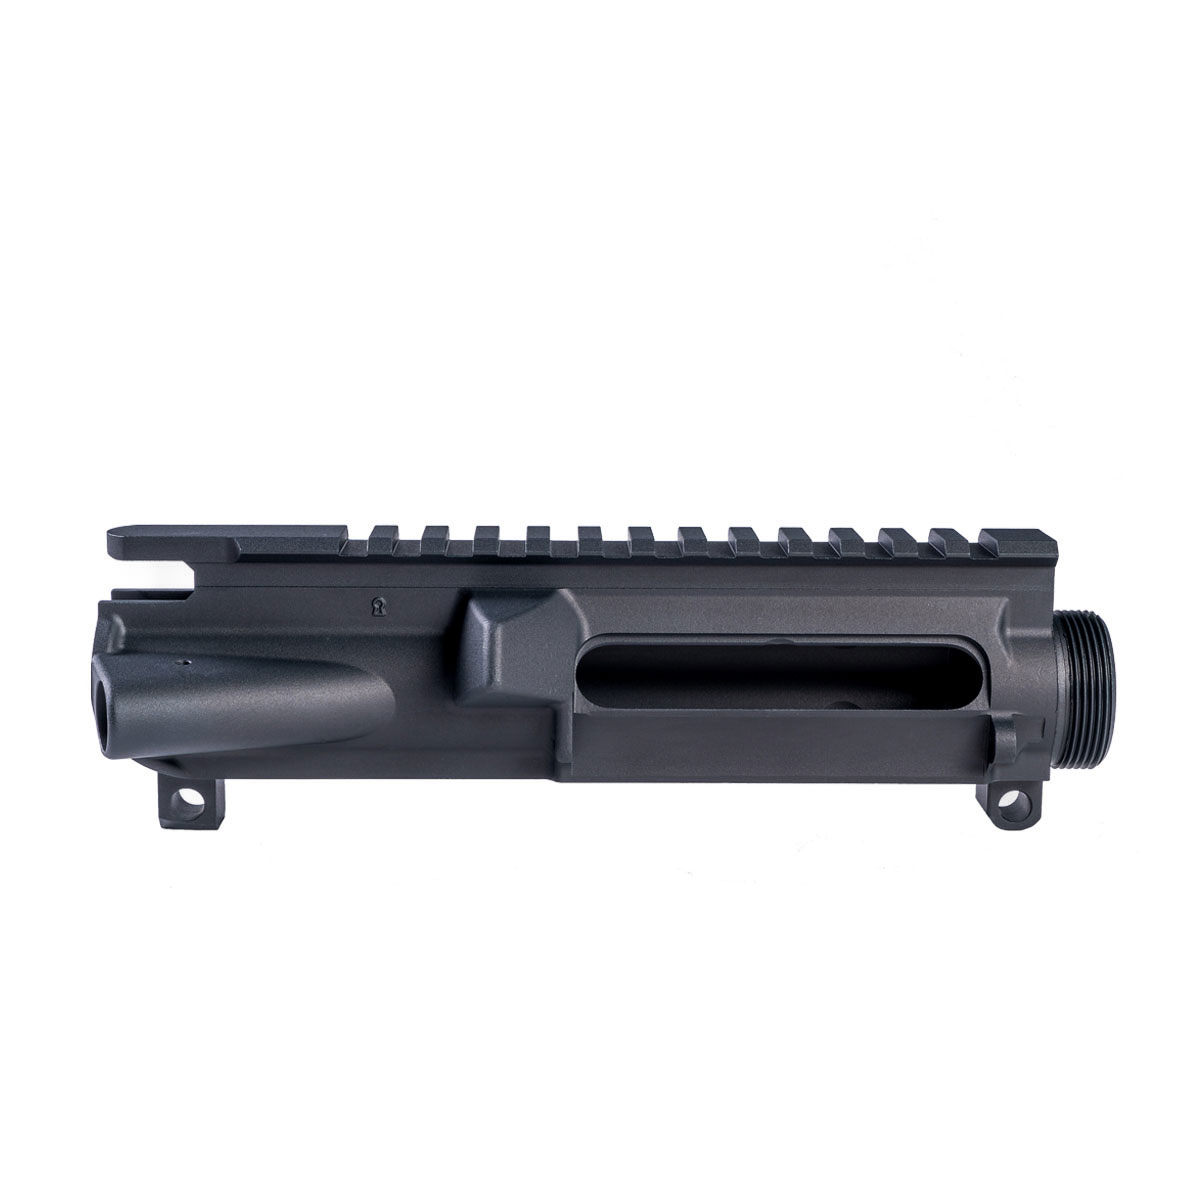 Davidson Defense Stripped Upper with M4 Feedramps - 7075 T6 Aluminum